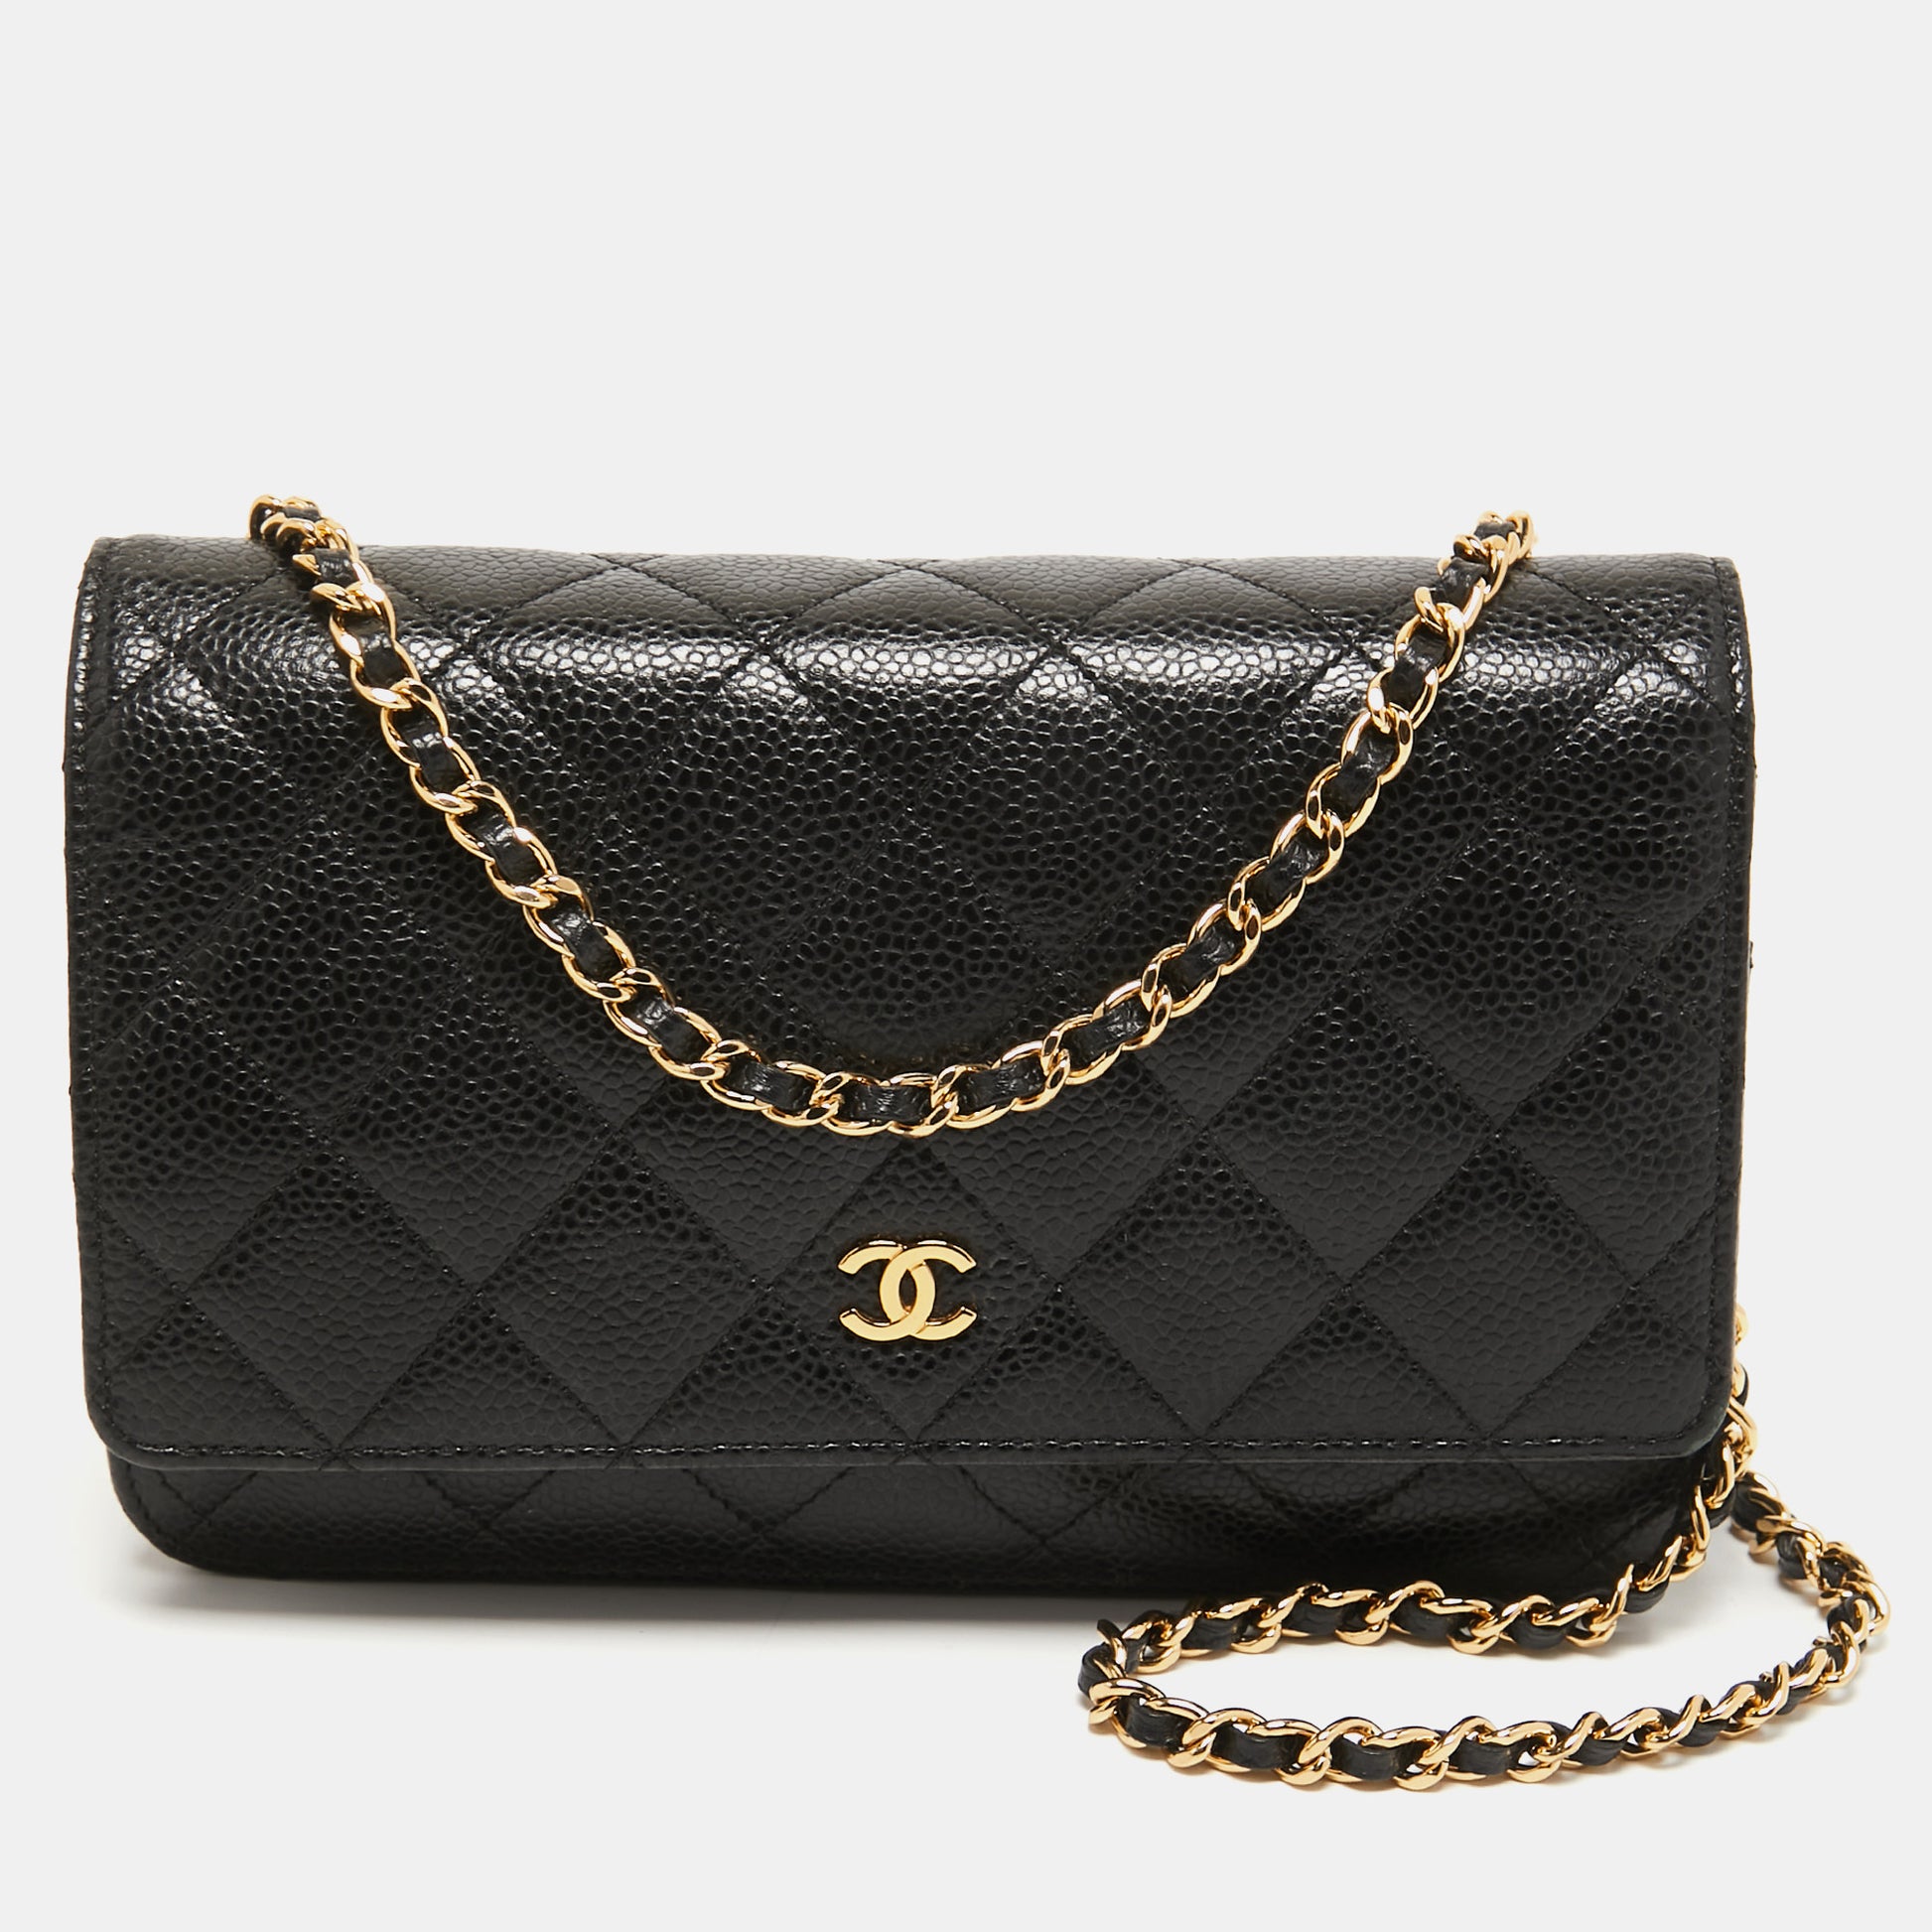 Chanel Black Quilted Caviar Leather Classic Wallet on Chain